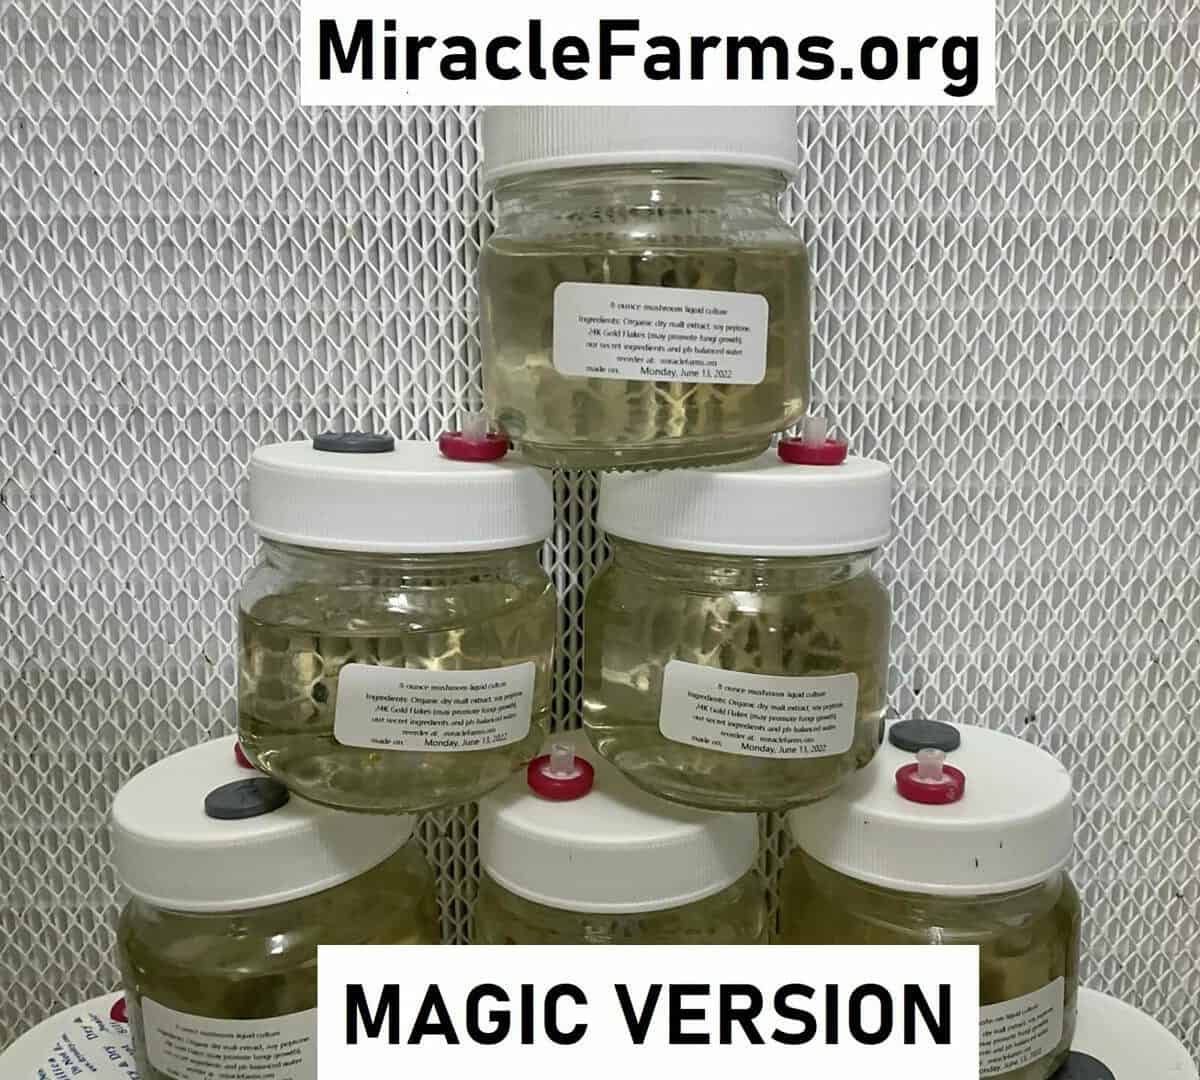 8oz Liquid Mushroom Culture jars with 24K gold infused nutrient broth designed specifically for cubes or magic mushroom strains made by hand sold only at miracle farms dot org IMG 2679